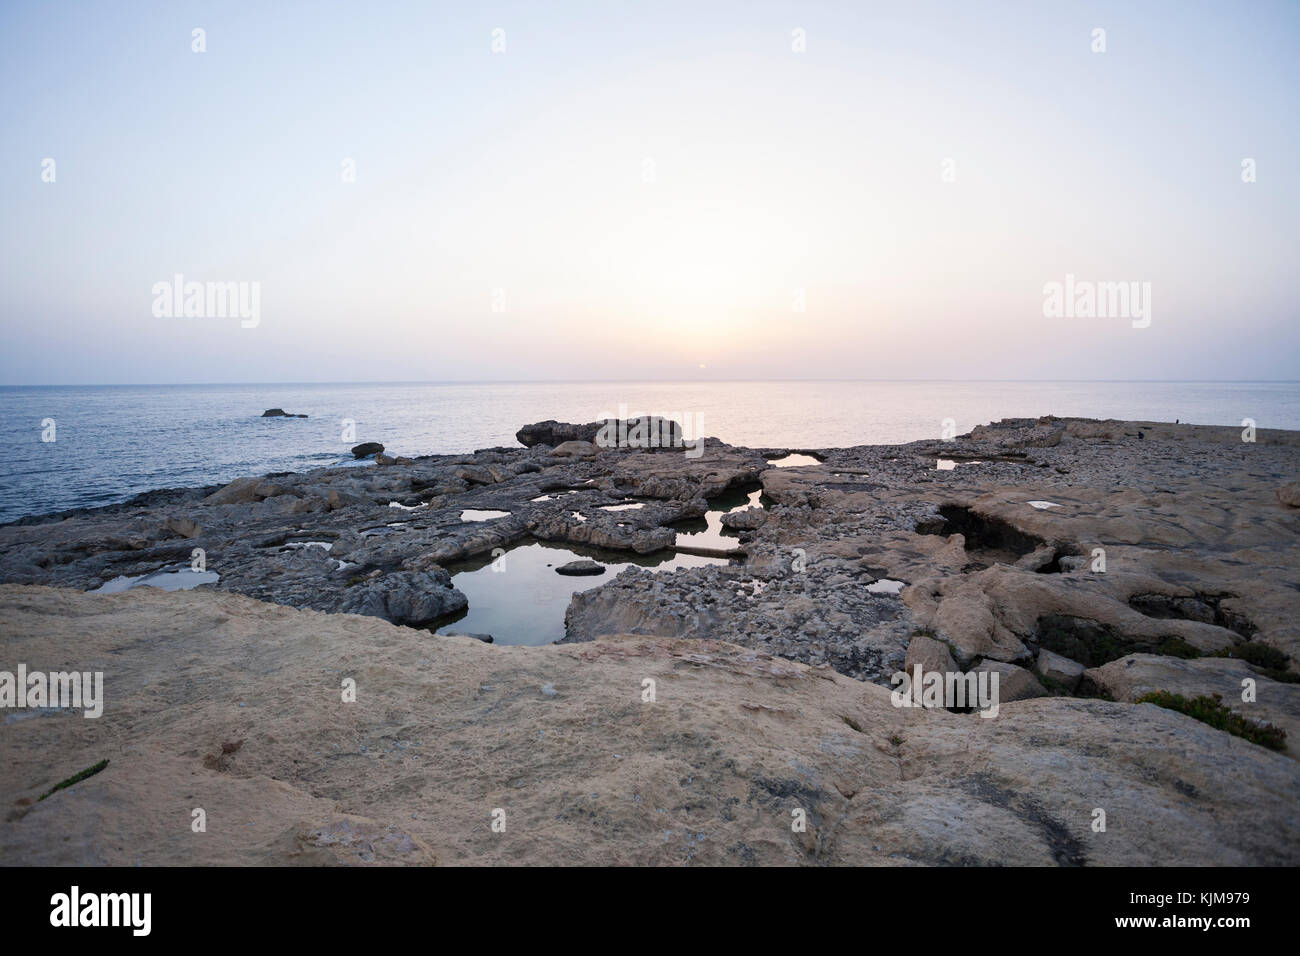 Sunset hour at Dwejra Bay, looking at sea, with rocky shore foreground. Stock Photo